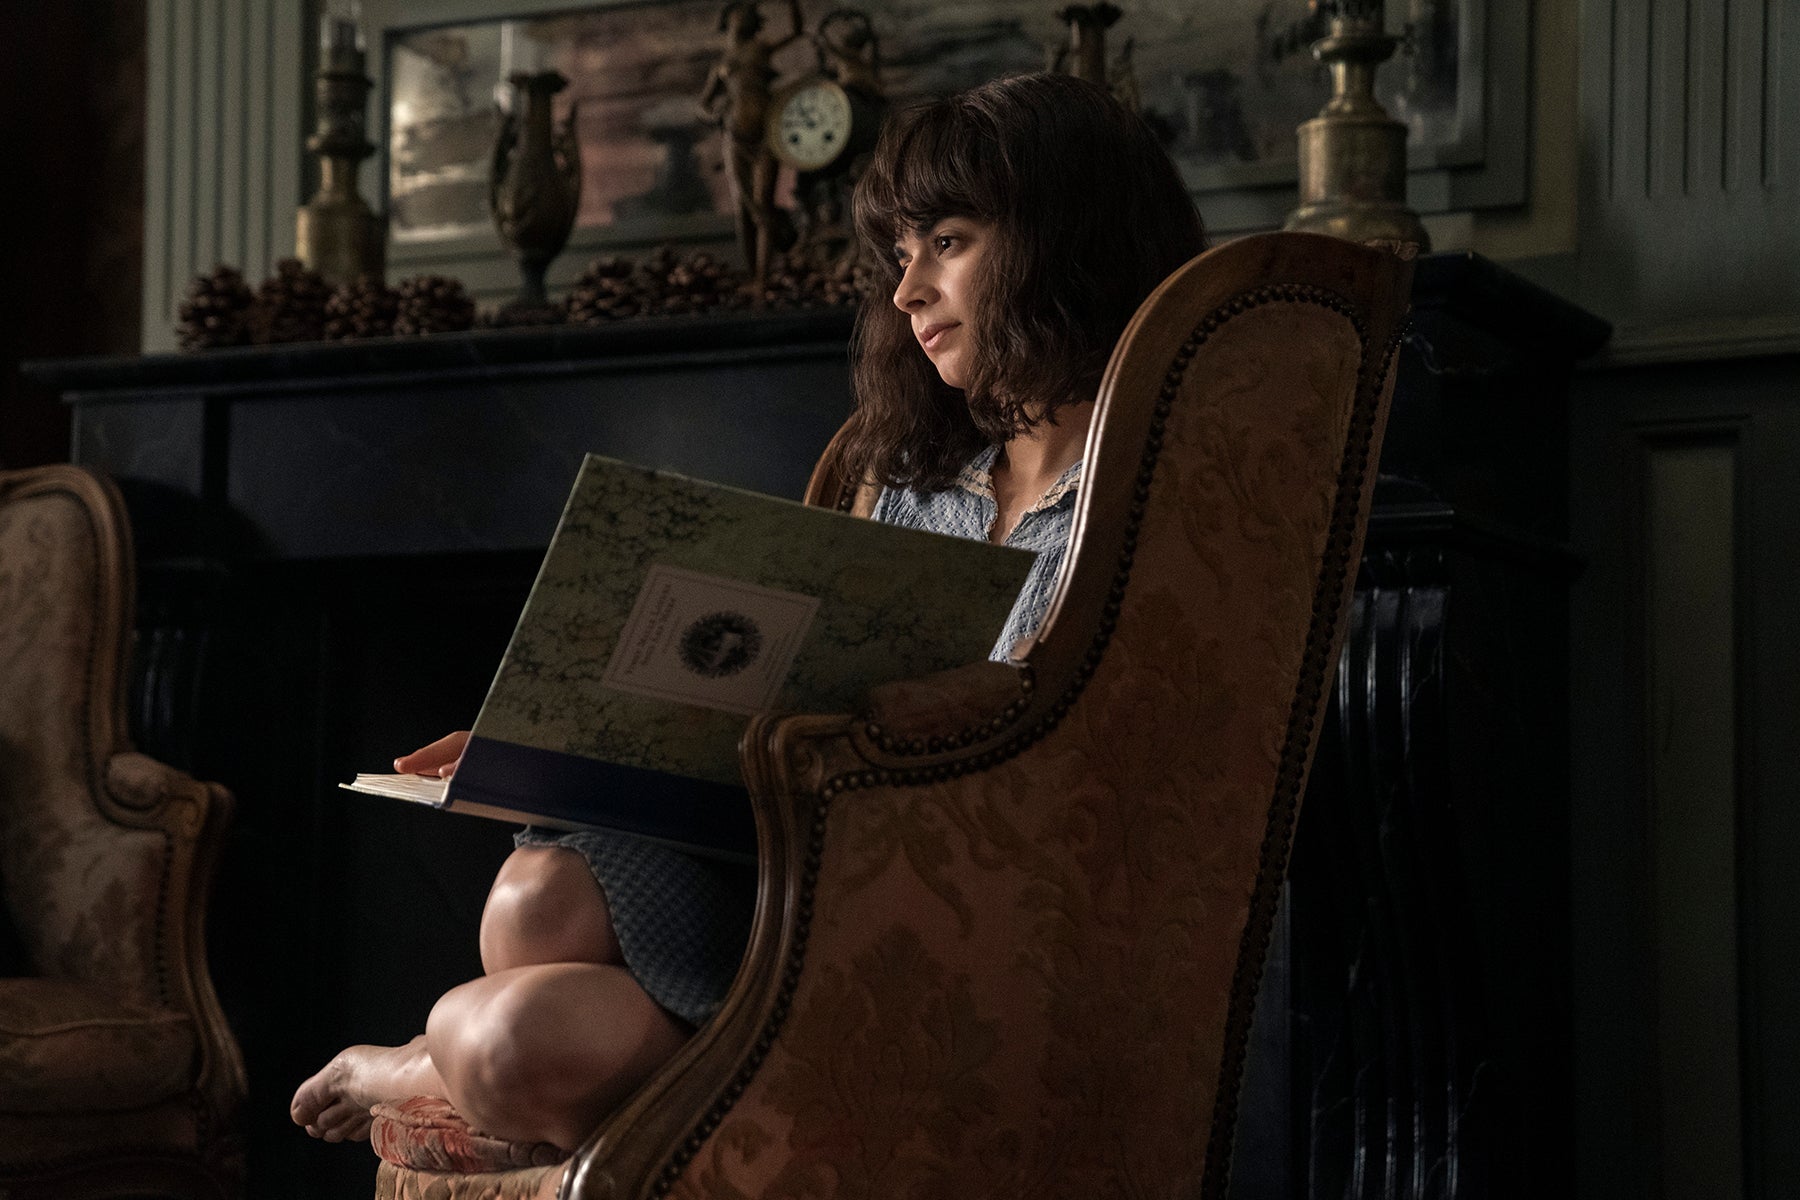 Aria Mia Loberti sitting in a chair looking to the left, holding a book open in her lap